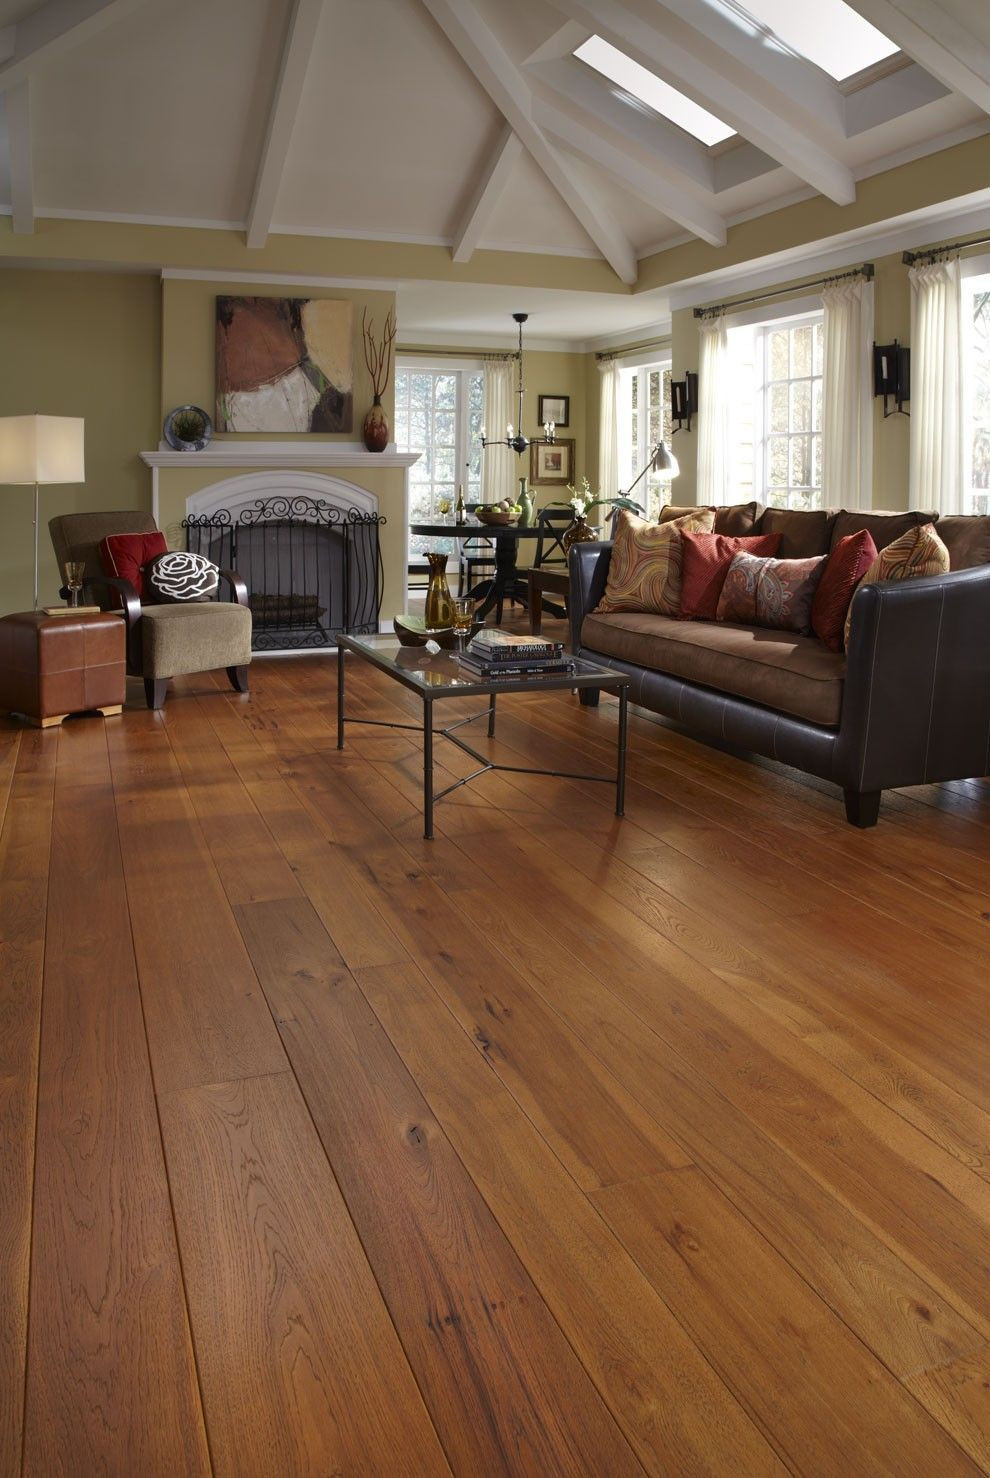 24 Recommended How Long Does It Take to Refinish Hardwood Floors 2023 free download how long does it take to refinish hardwood floors of brushed hickory living room design magic pinterest living throughout brushed hickory living room